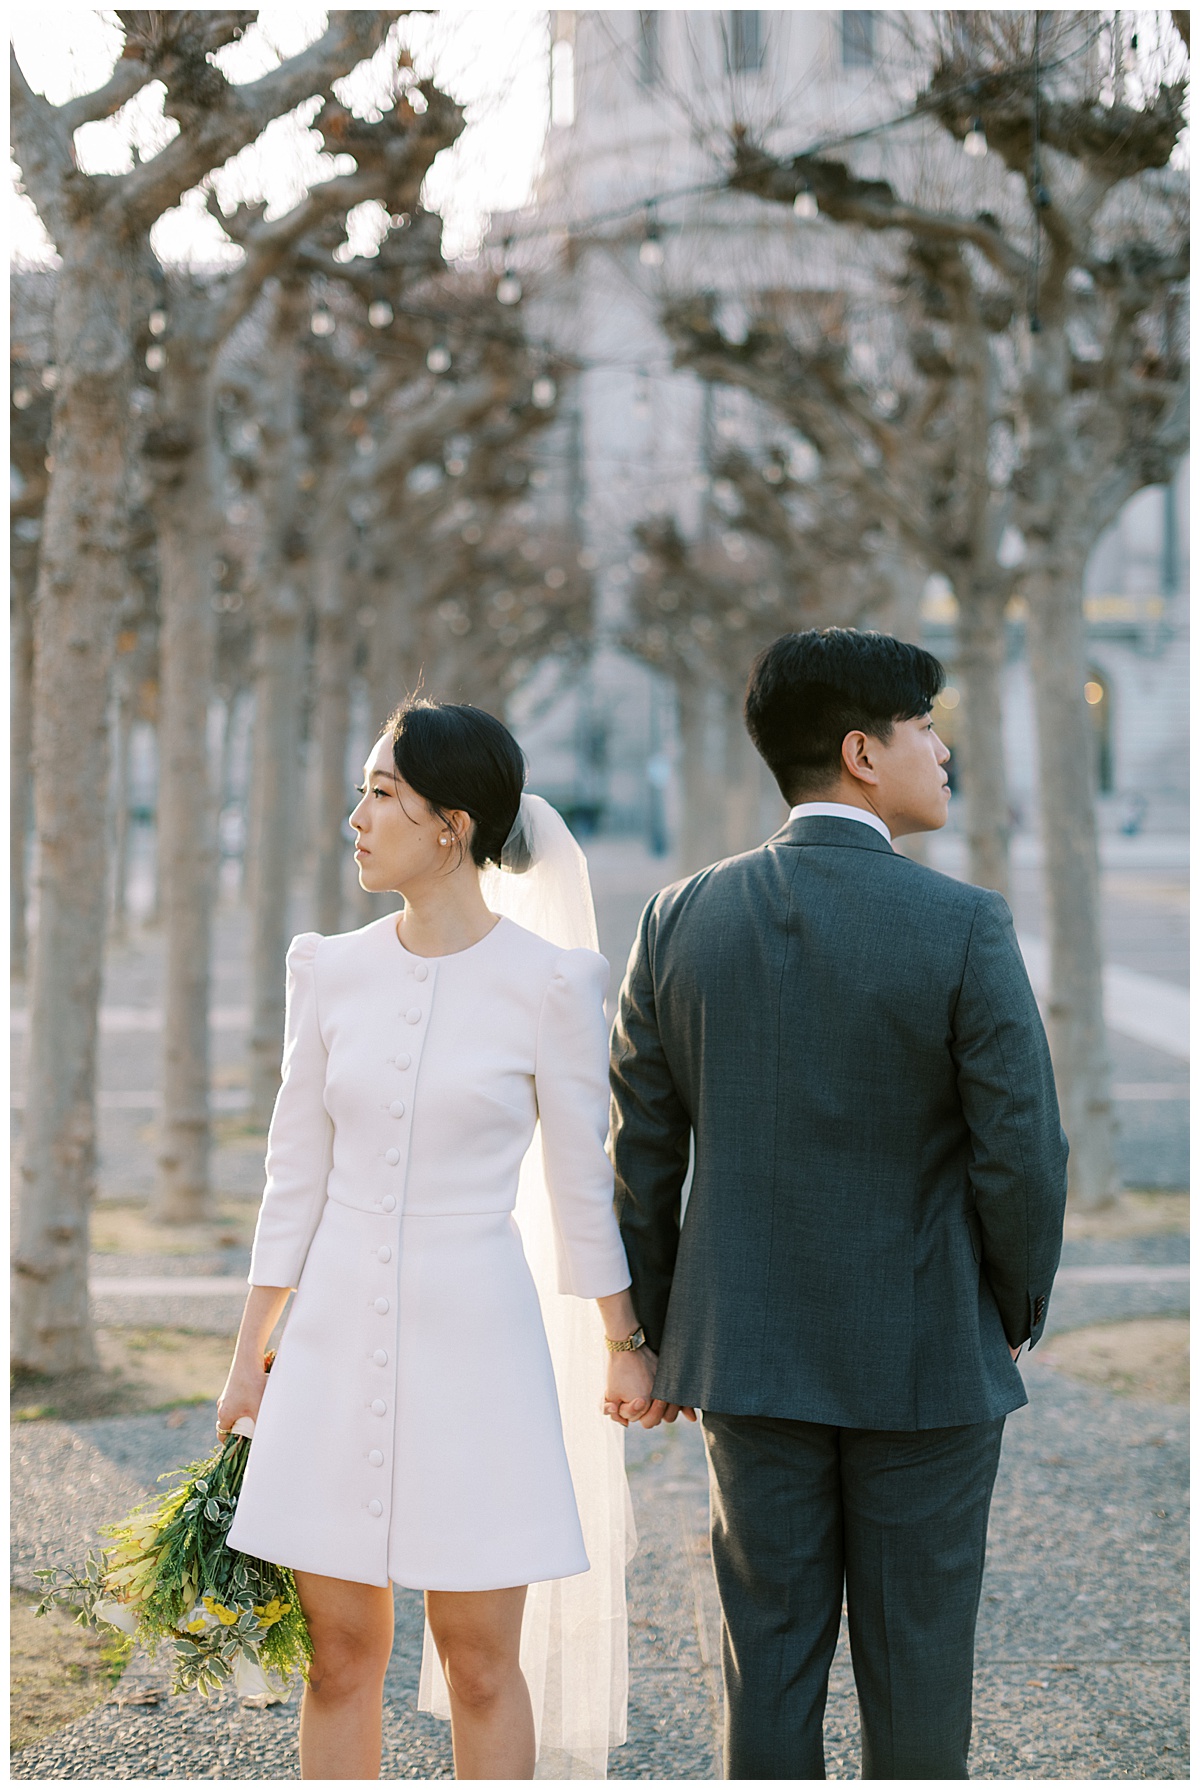 Danielle & Ron's cool and stylish SF City Hall wedding couple's portraits